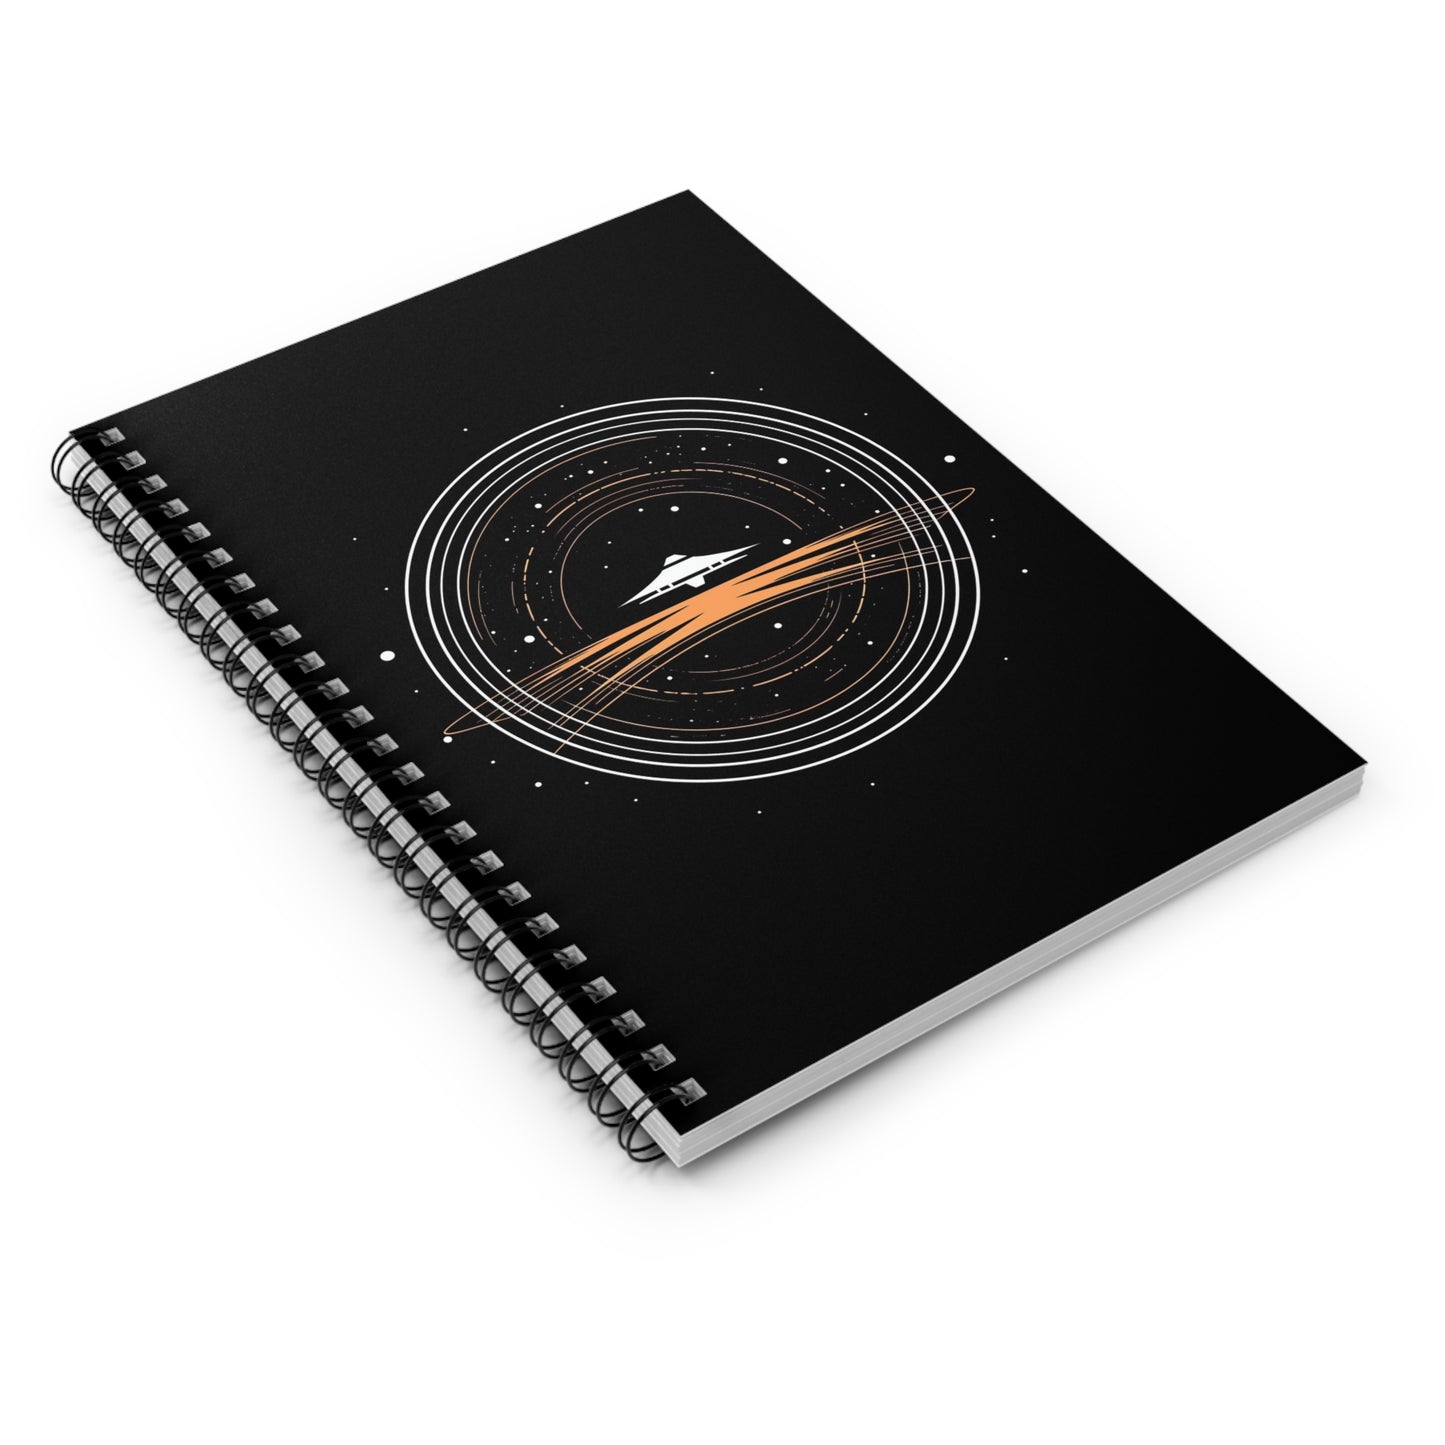 Minimalist Space Journal, Cosmic Explorer Diary, Black Space Logo Spiral Notebook, Sci-Fi UFO Spaceship Diary, Astronomy Notes, Ruled Line